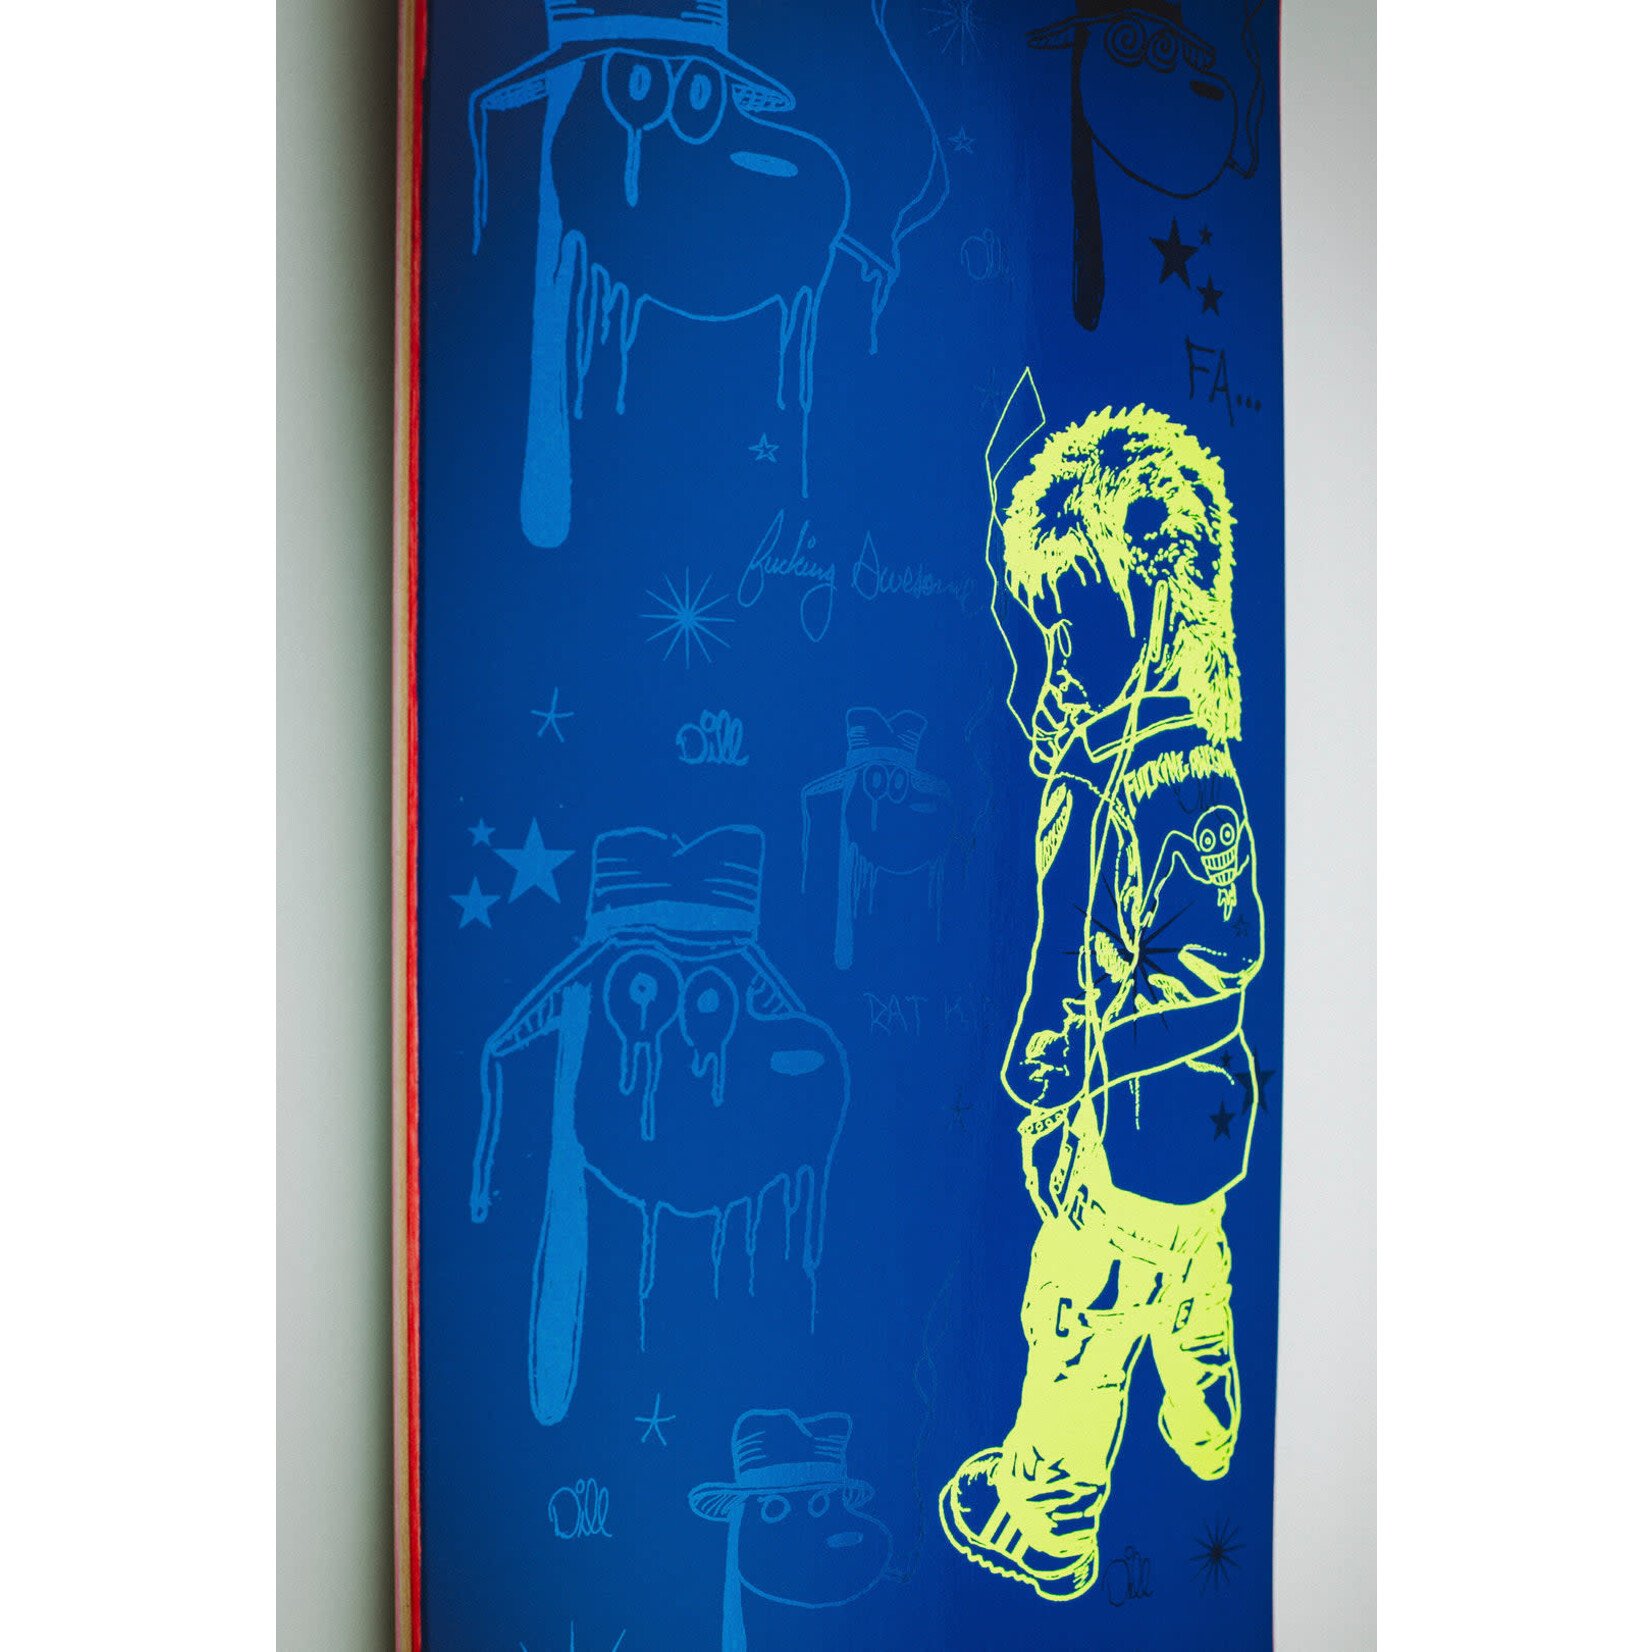 Fucking Awesome Jason Dill - Ratkid Colorway 2 Shape 1 Deck 8.25”